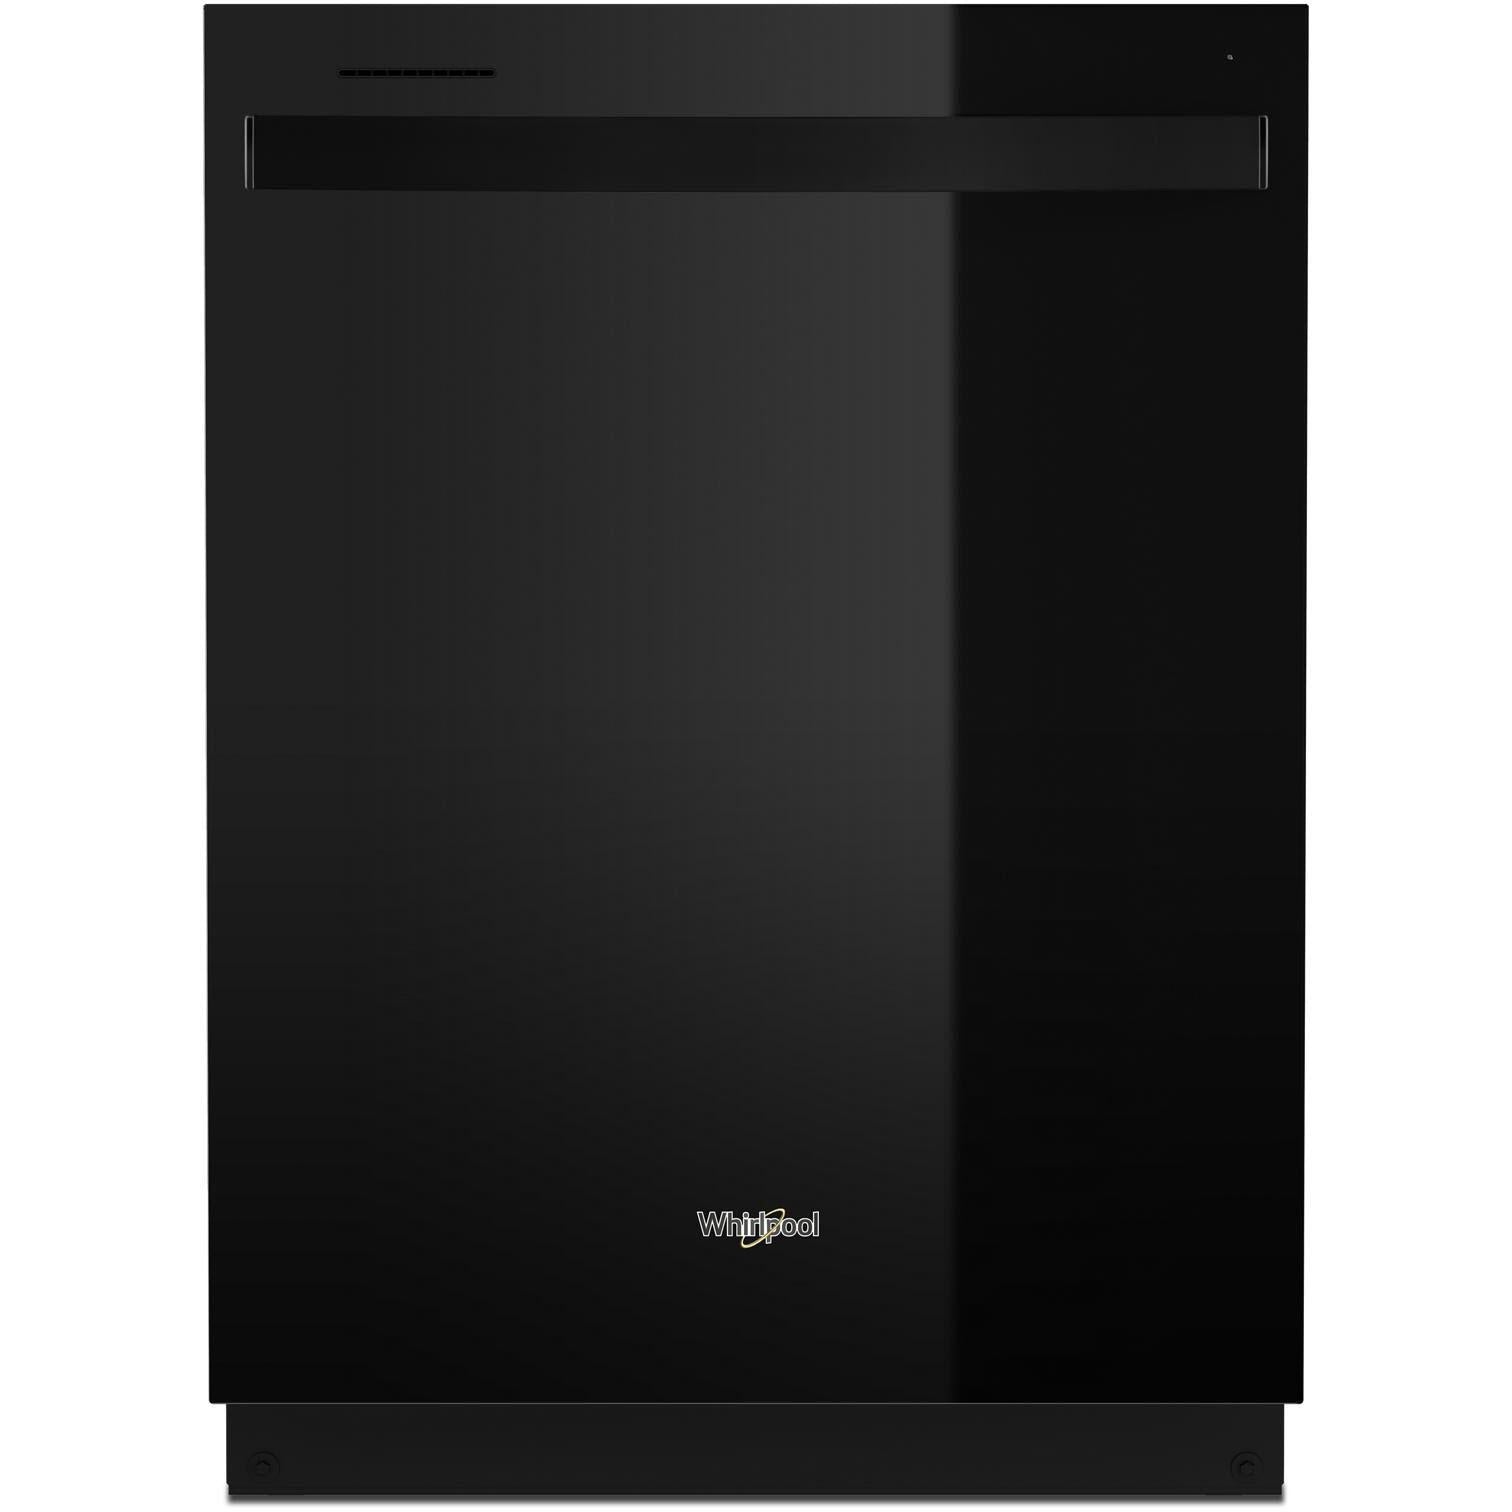 Whirlpool 24-inch Built-in Dishwasher with Sani Rinse Option WDT750SAKB